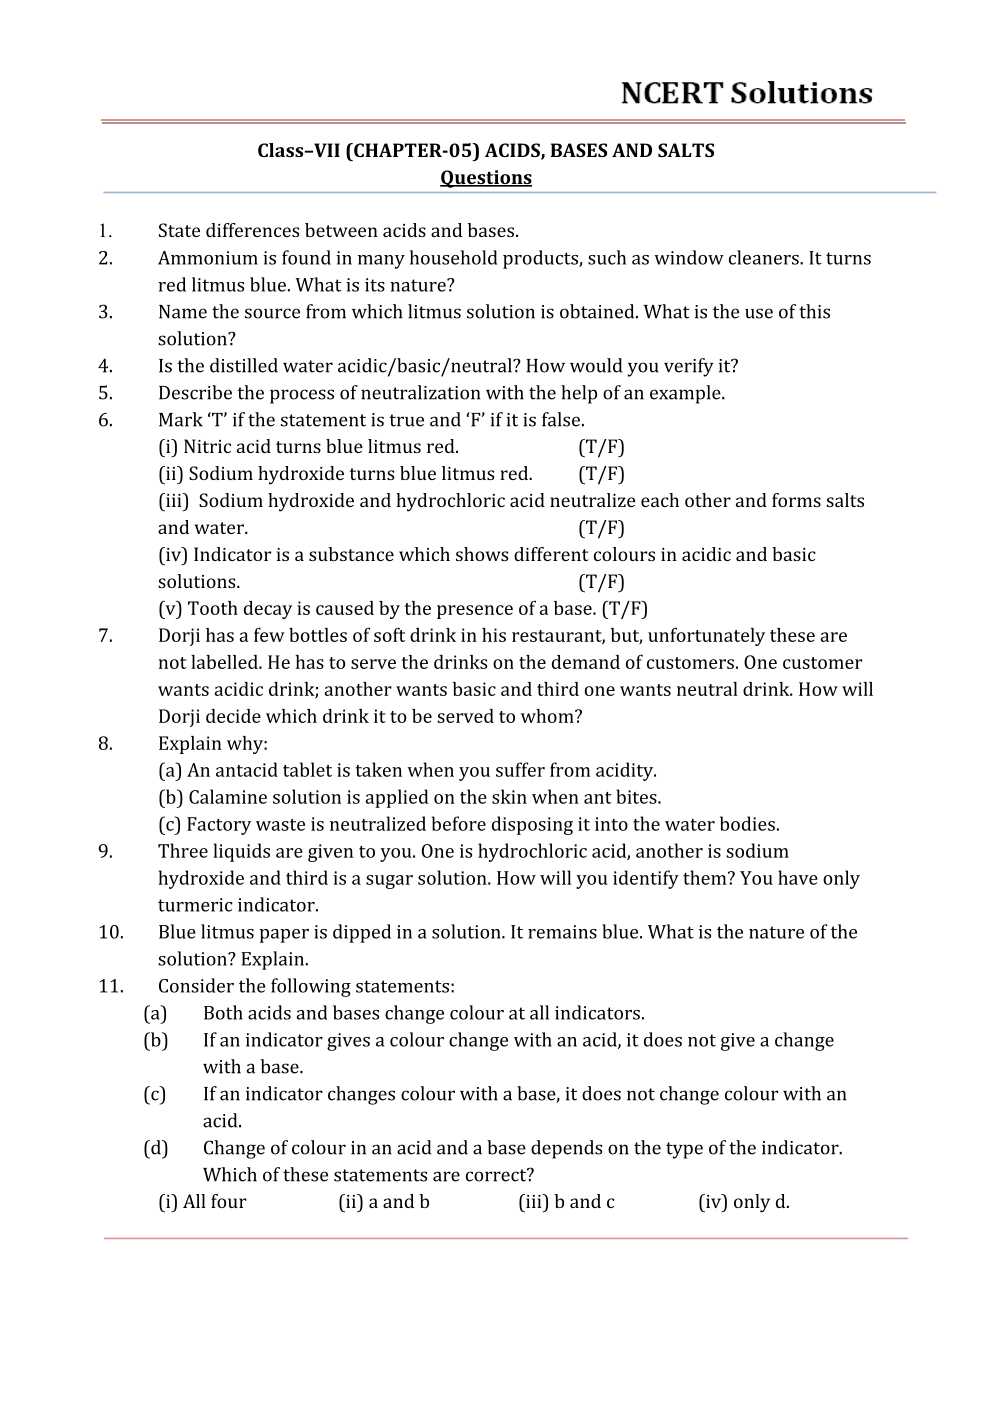 NCERT Solutions For Class 7 science Chapter 5 Acids, Bases and Salts